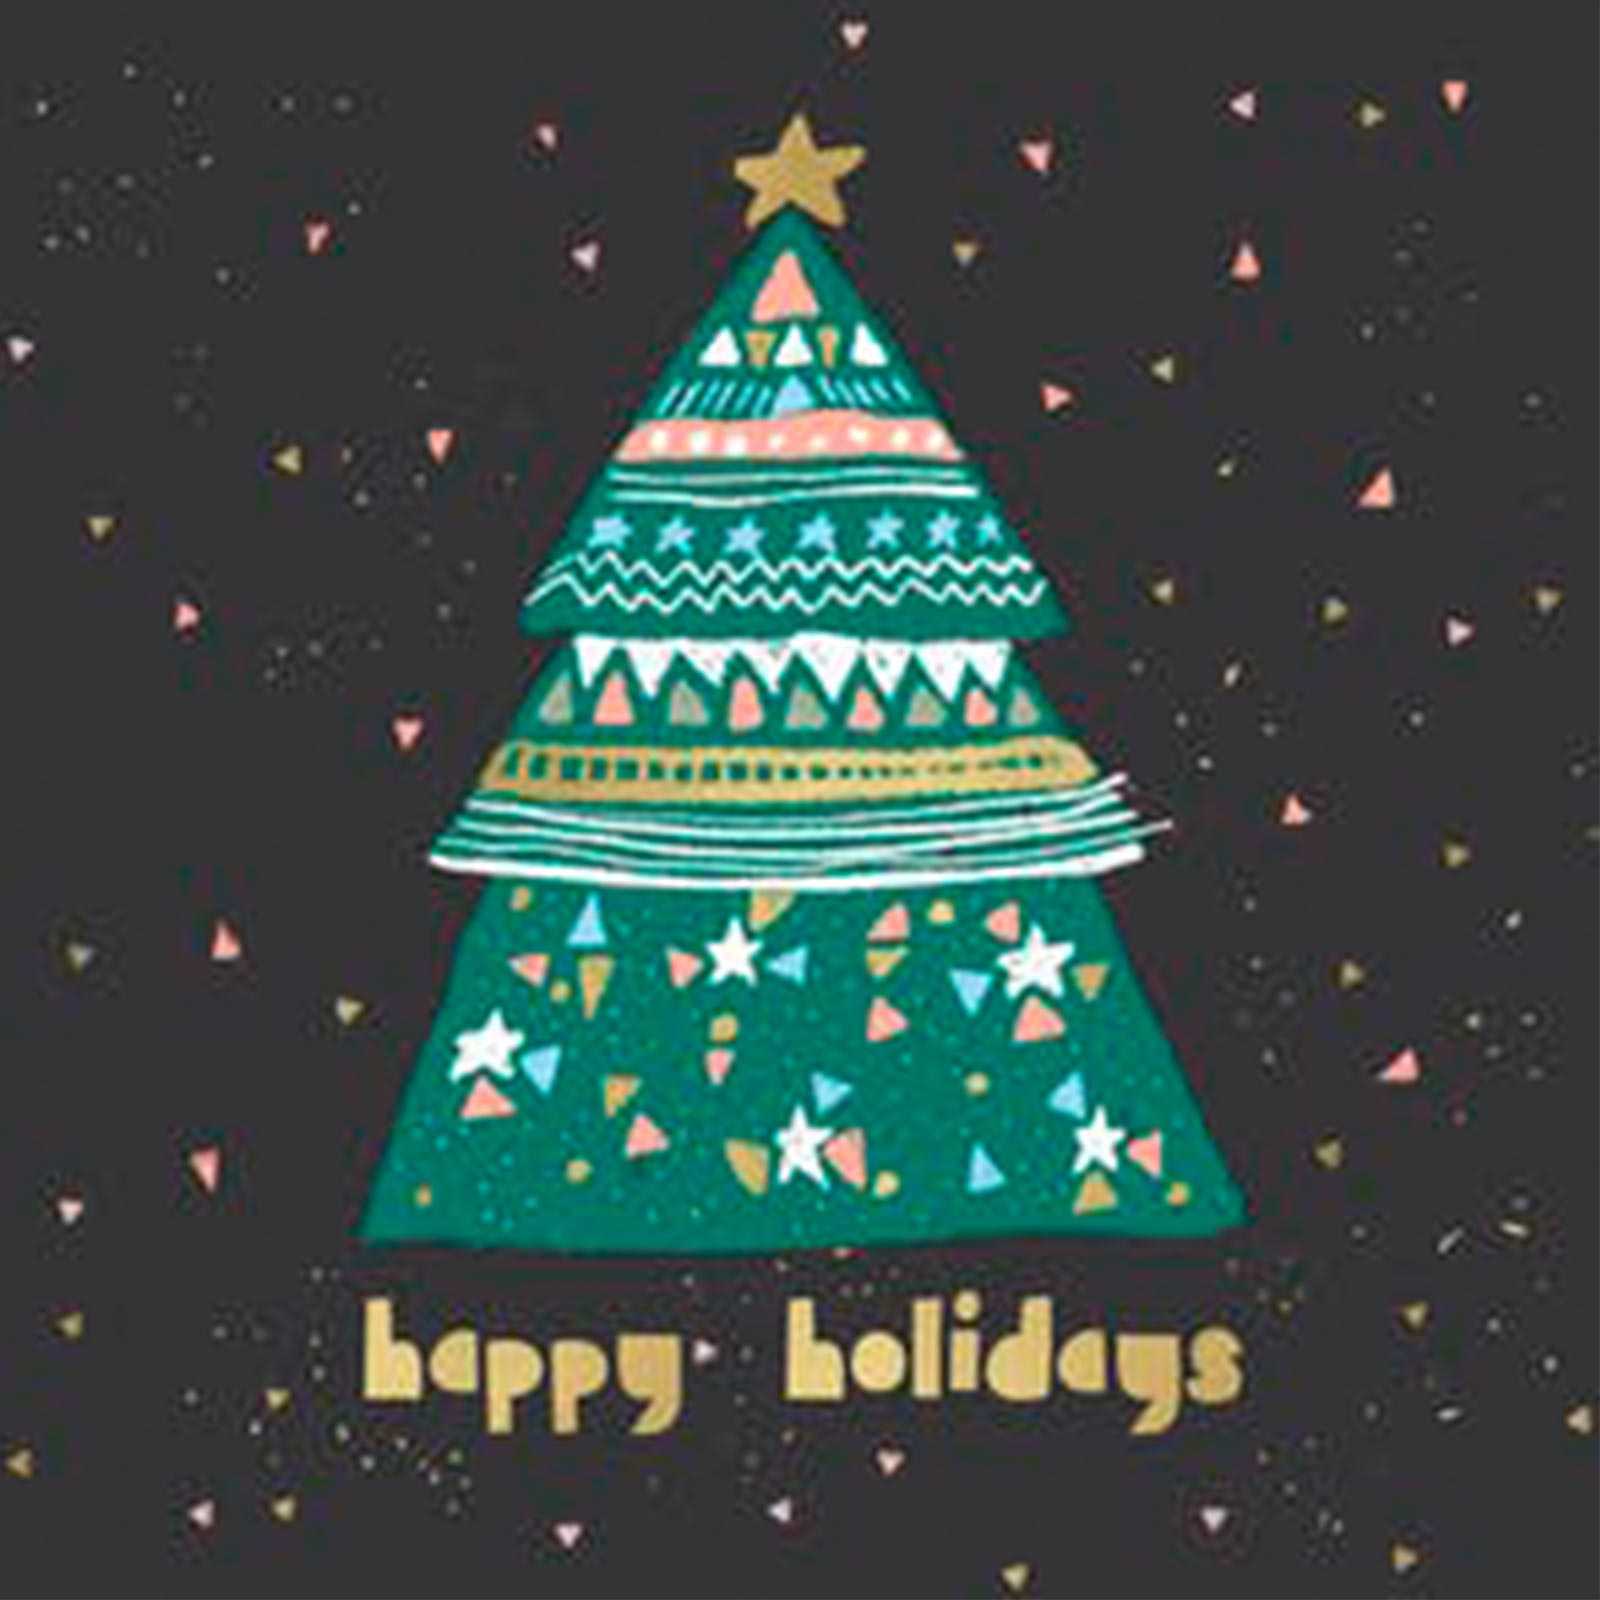 Free Christmas Cards To Print Out And Send This Year Regarding Print Your Own Christmas Cards Templates